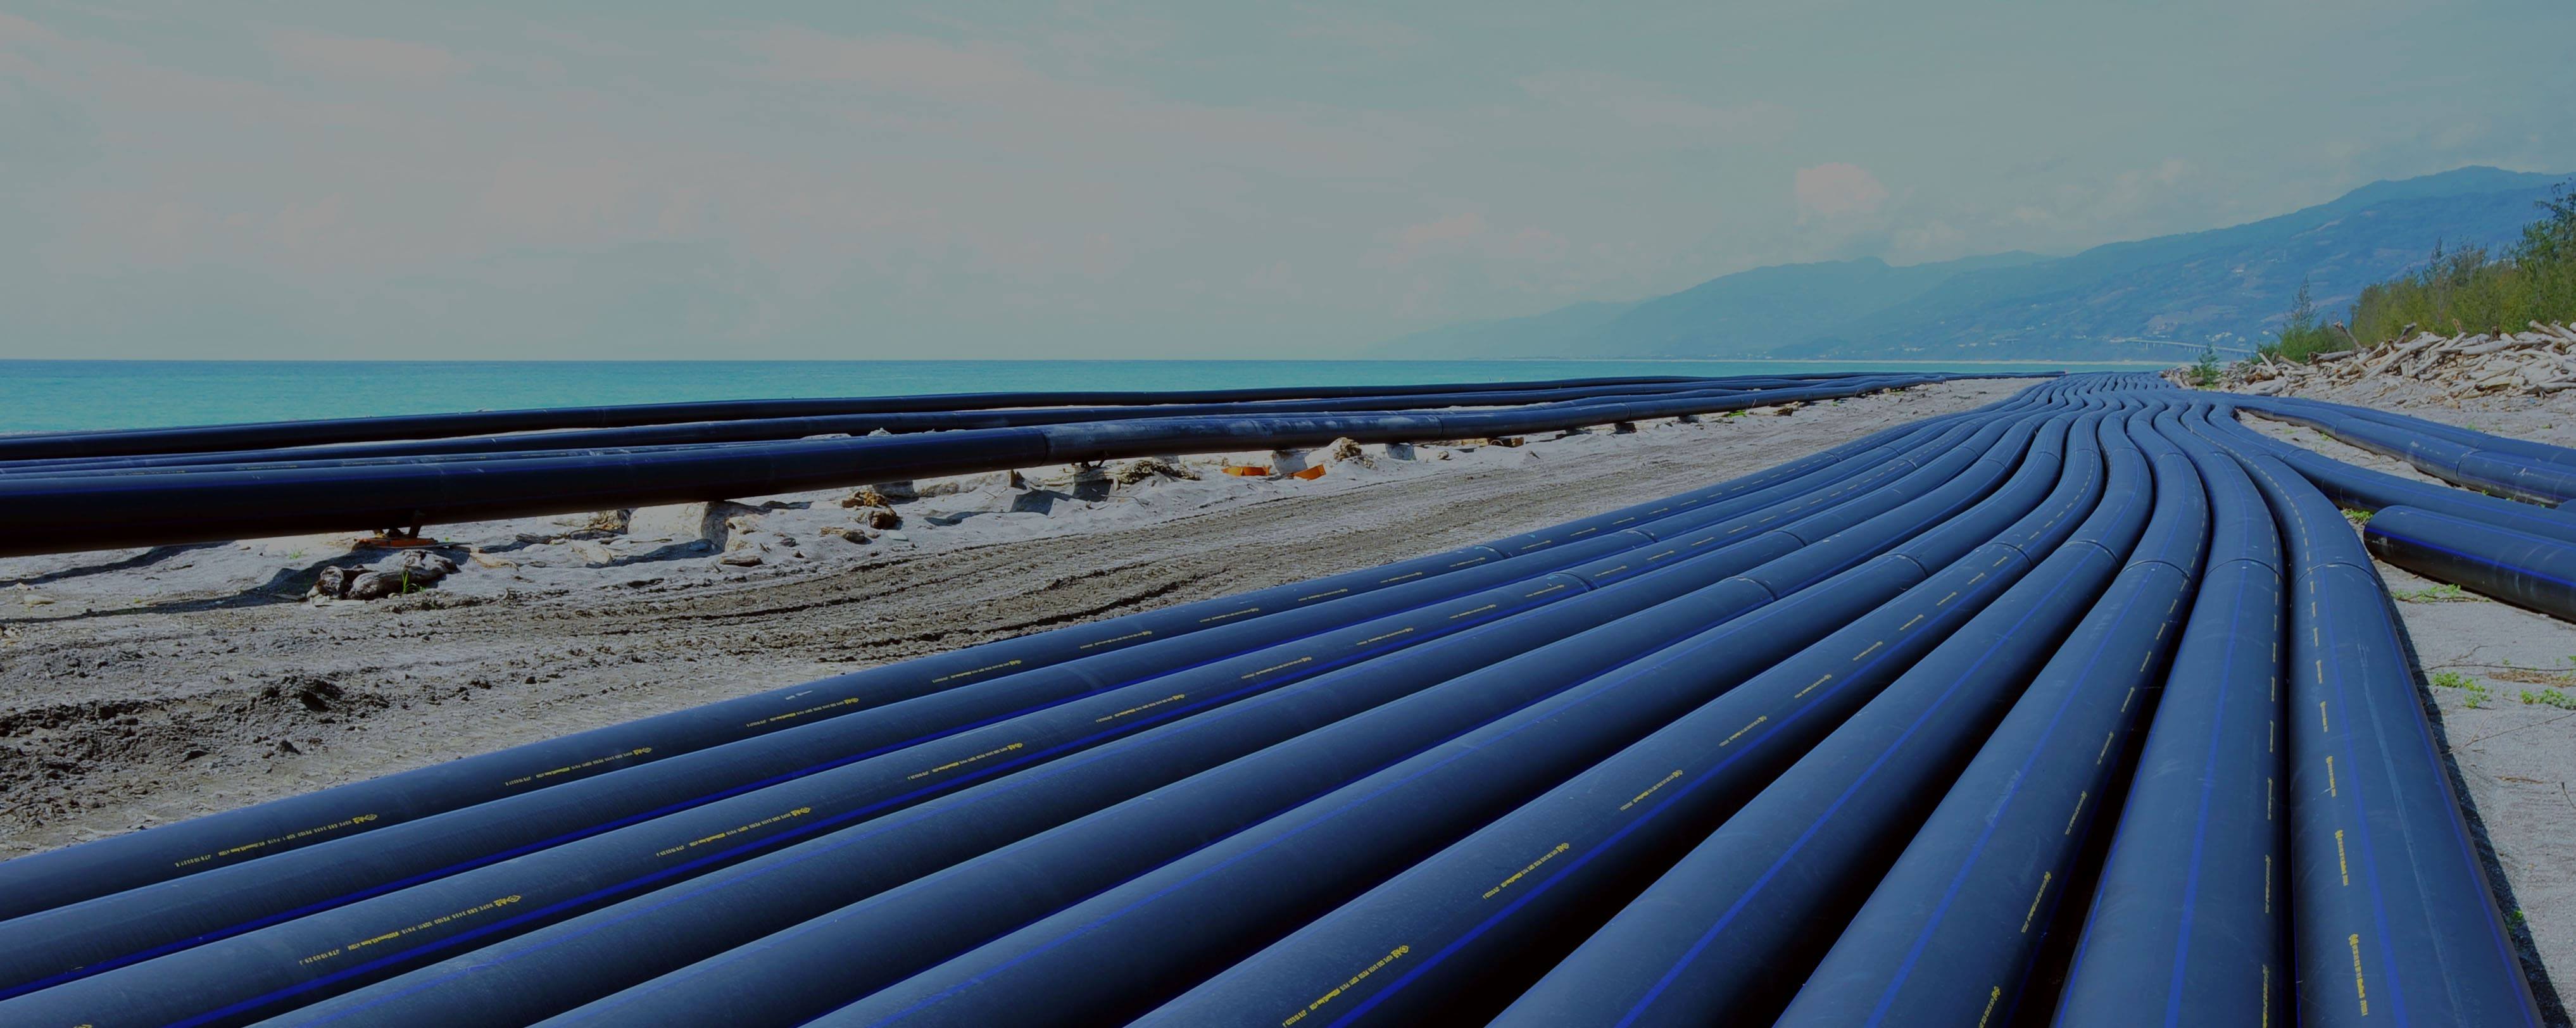 By complying with CNS standards and Green Mark, Nan Ya HDPE pipe (High Density Polyethylene Pipe; HDPE Pipes Polyethylene Piping Systems; High Density Polyethylene Pipe; Industrial HDPE Polyethylene Pipe) produced by one of the largest plastic pipe suppliers and the most productive PVC pipe manufacturers in the plastic pipes industry (PVC pipes market), with various specifications, has remarkable cold resistance (-40°C) and earthquake resistance (level 8). Furthermore, Nan Ya HDPE pipe, with diverse applications, is used for transportation of tap water, reclaimed water, and natural gas.